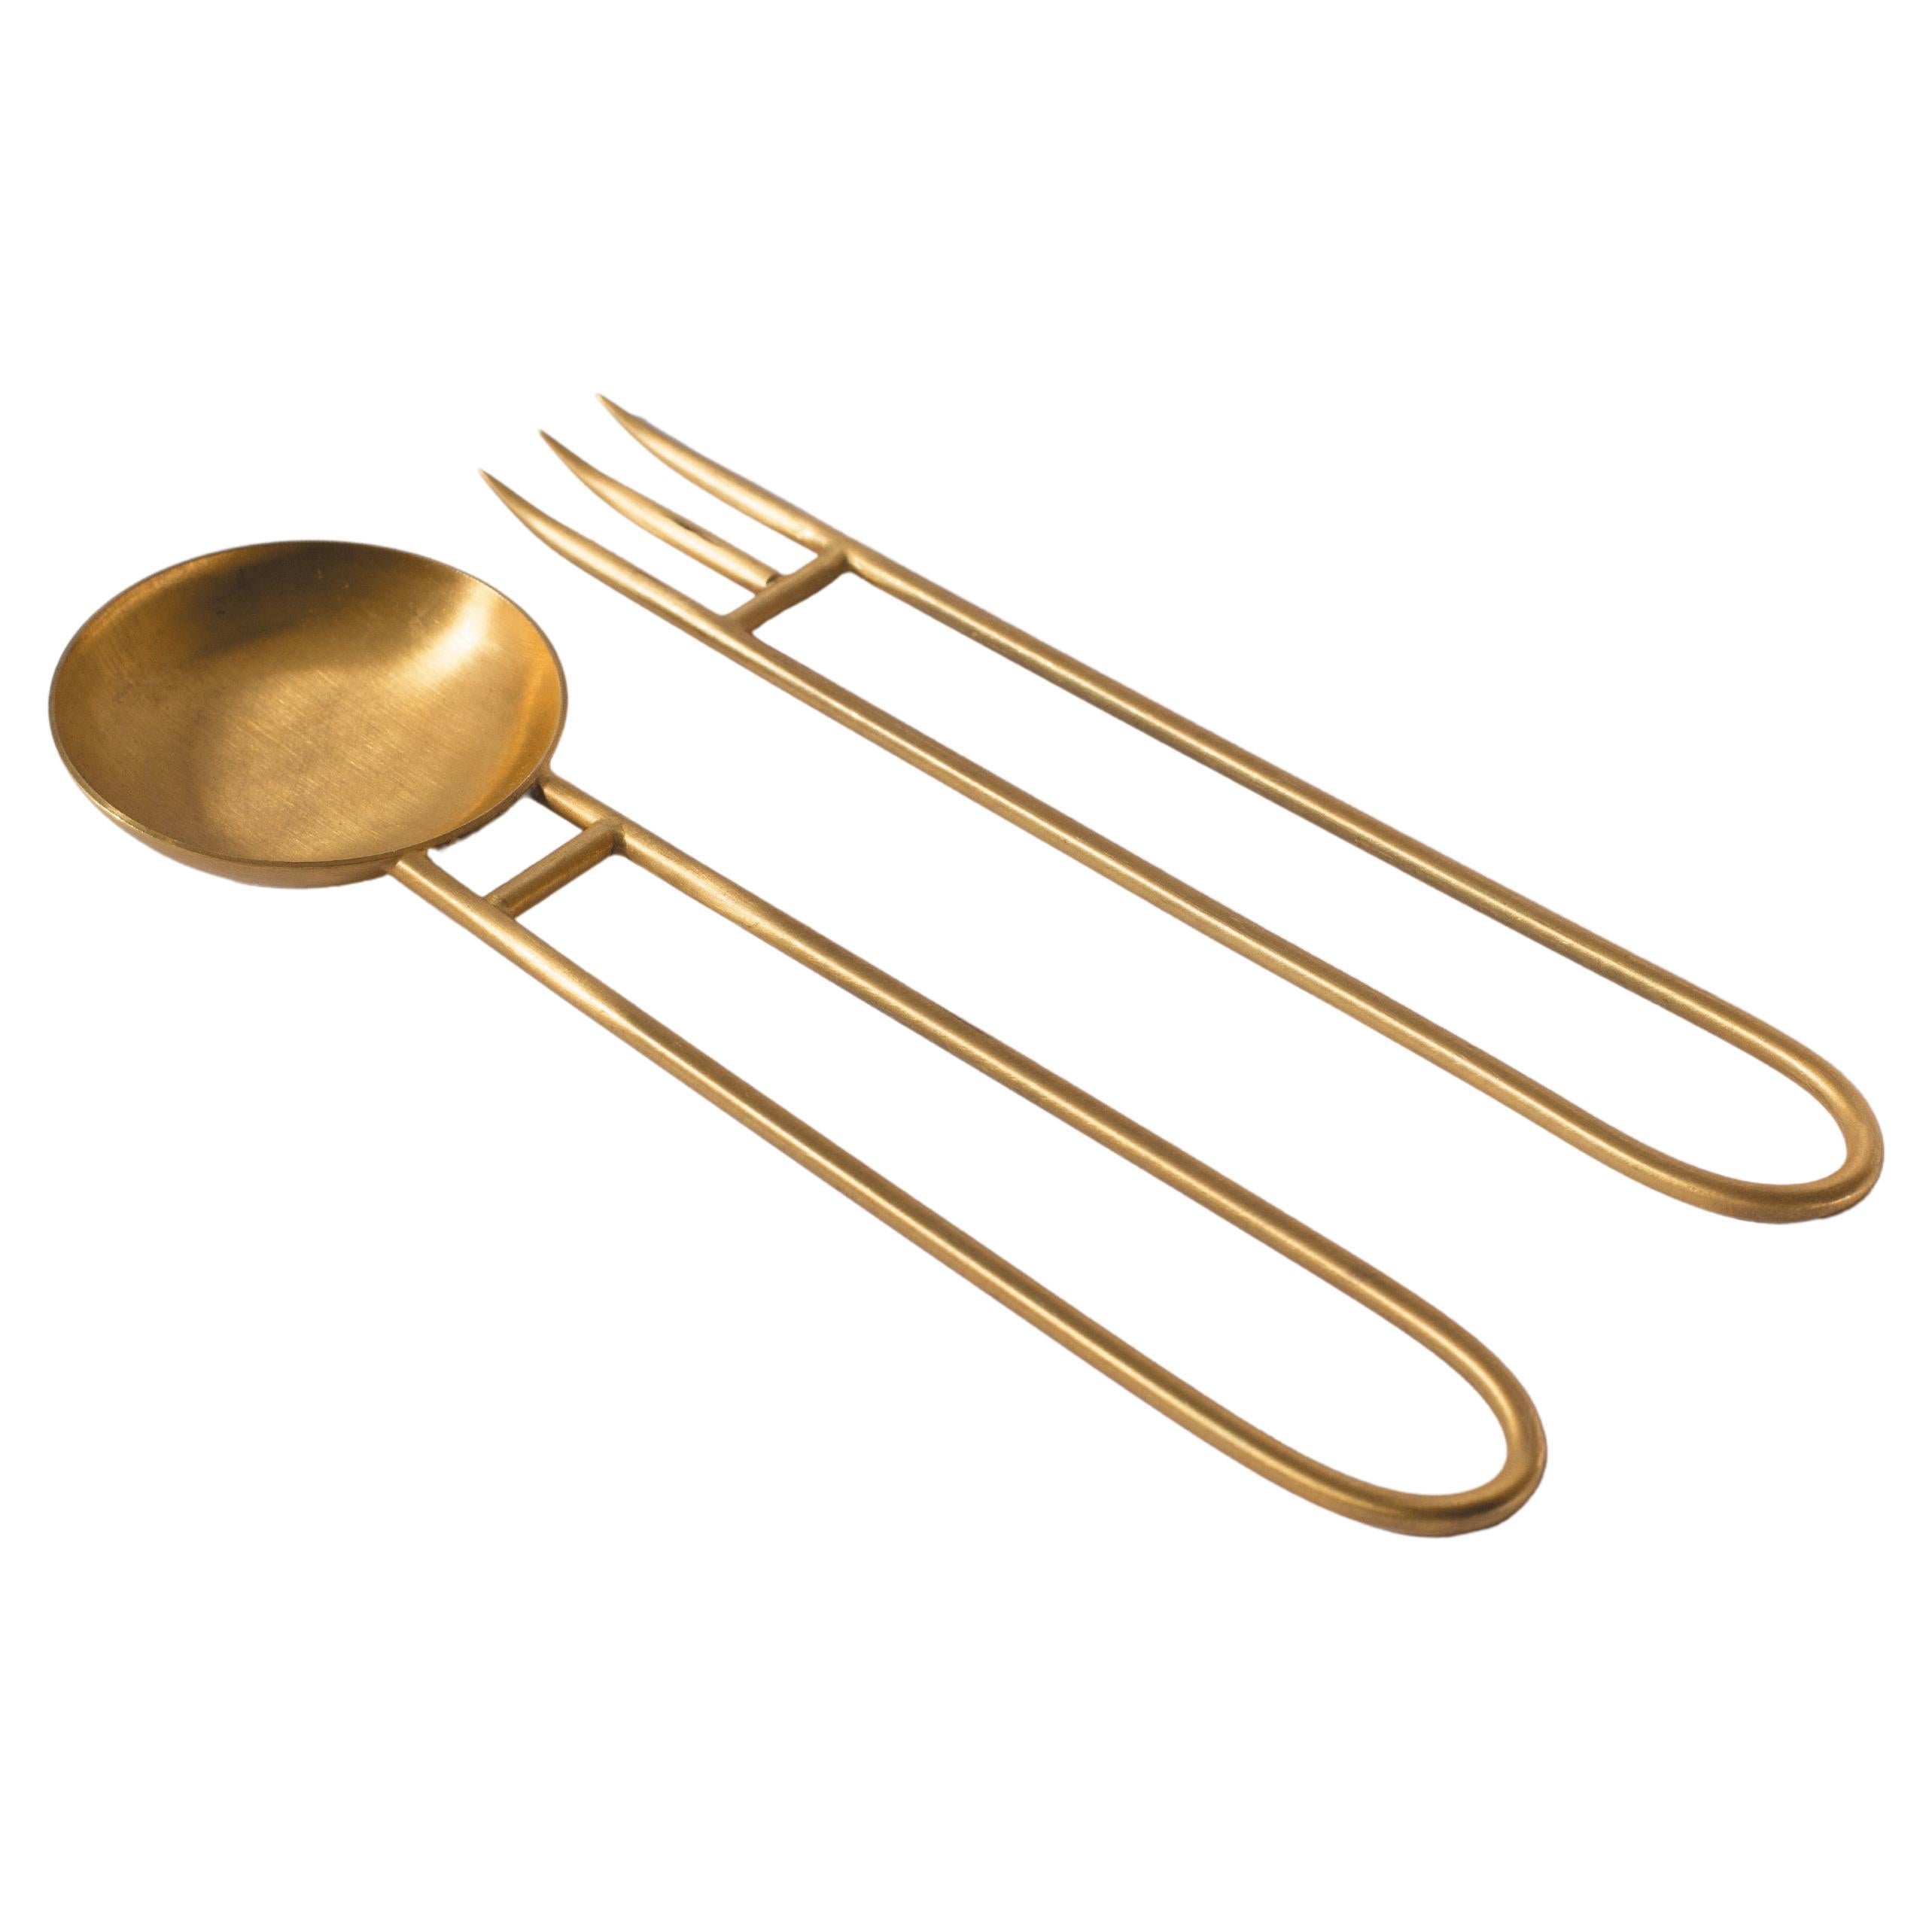 Contemporary Server Gold Plated Set Handcrafted in Italy by Natalia Criado